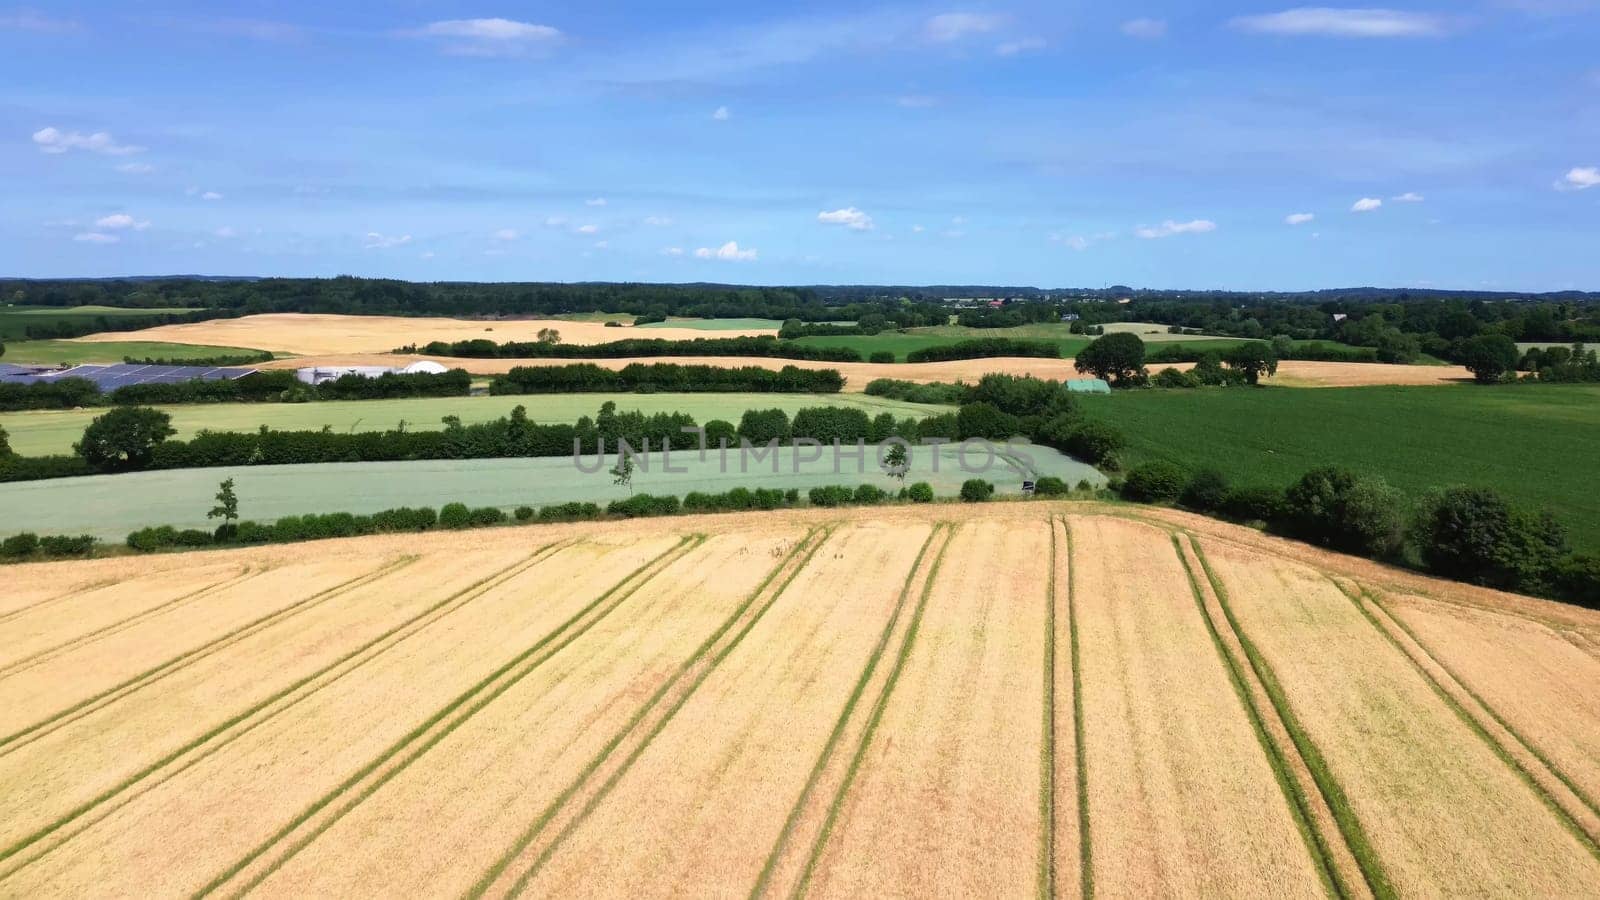 View over a wheat field in good weather found in northern germany